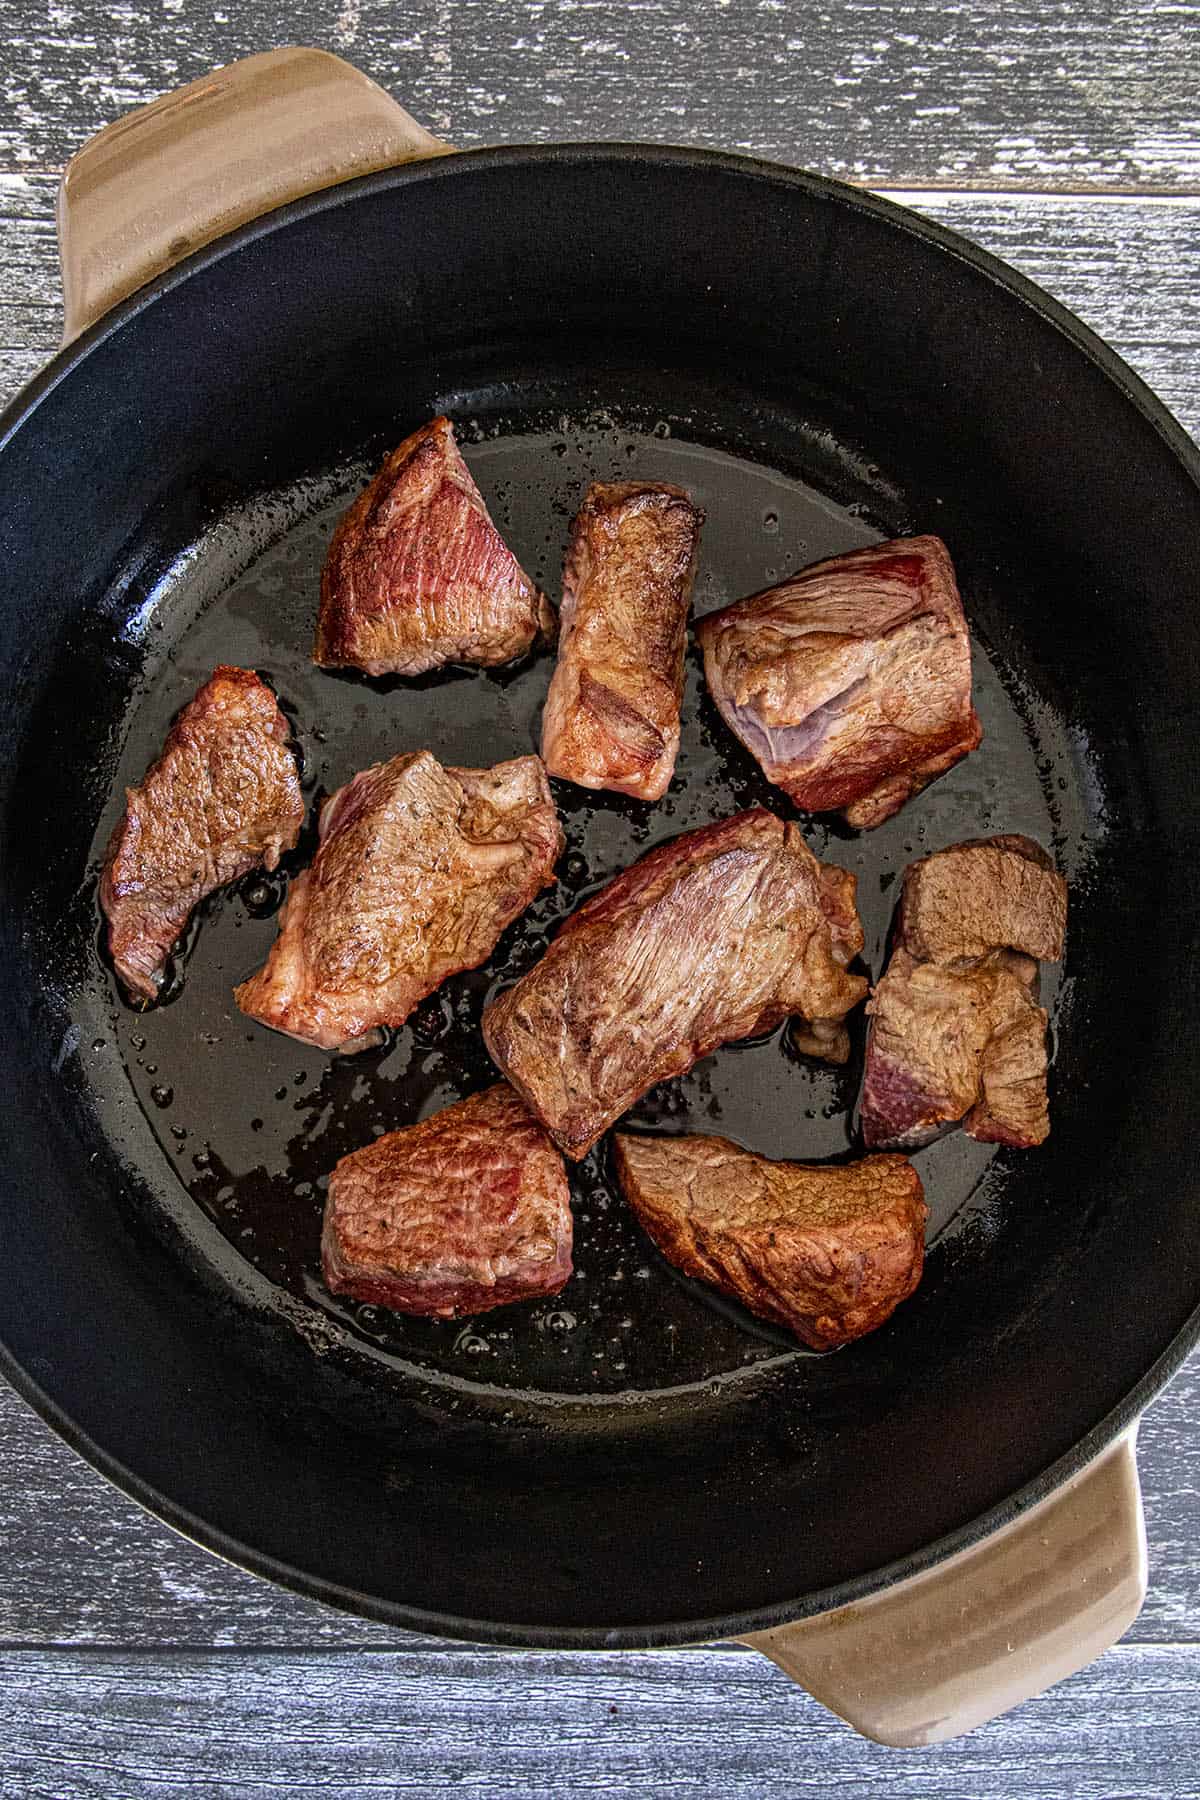 Searing the beef in a pot to make Yakamein